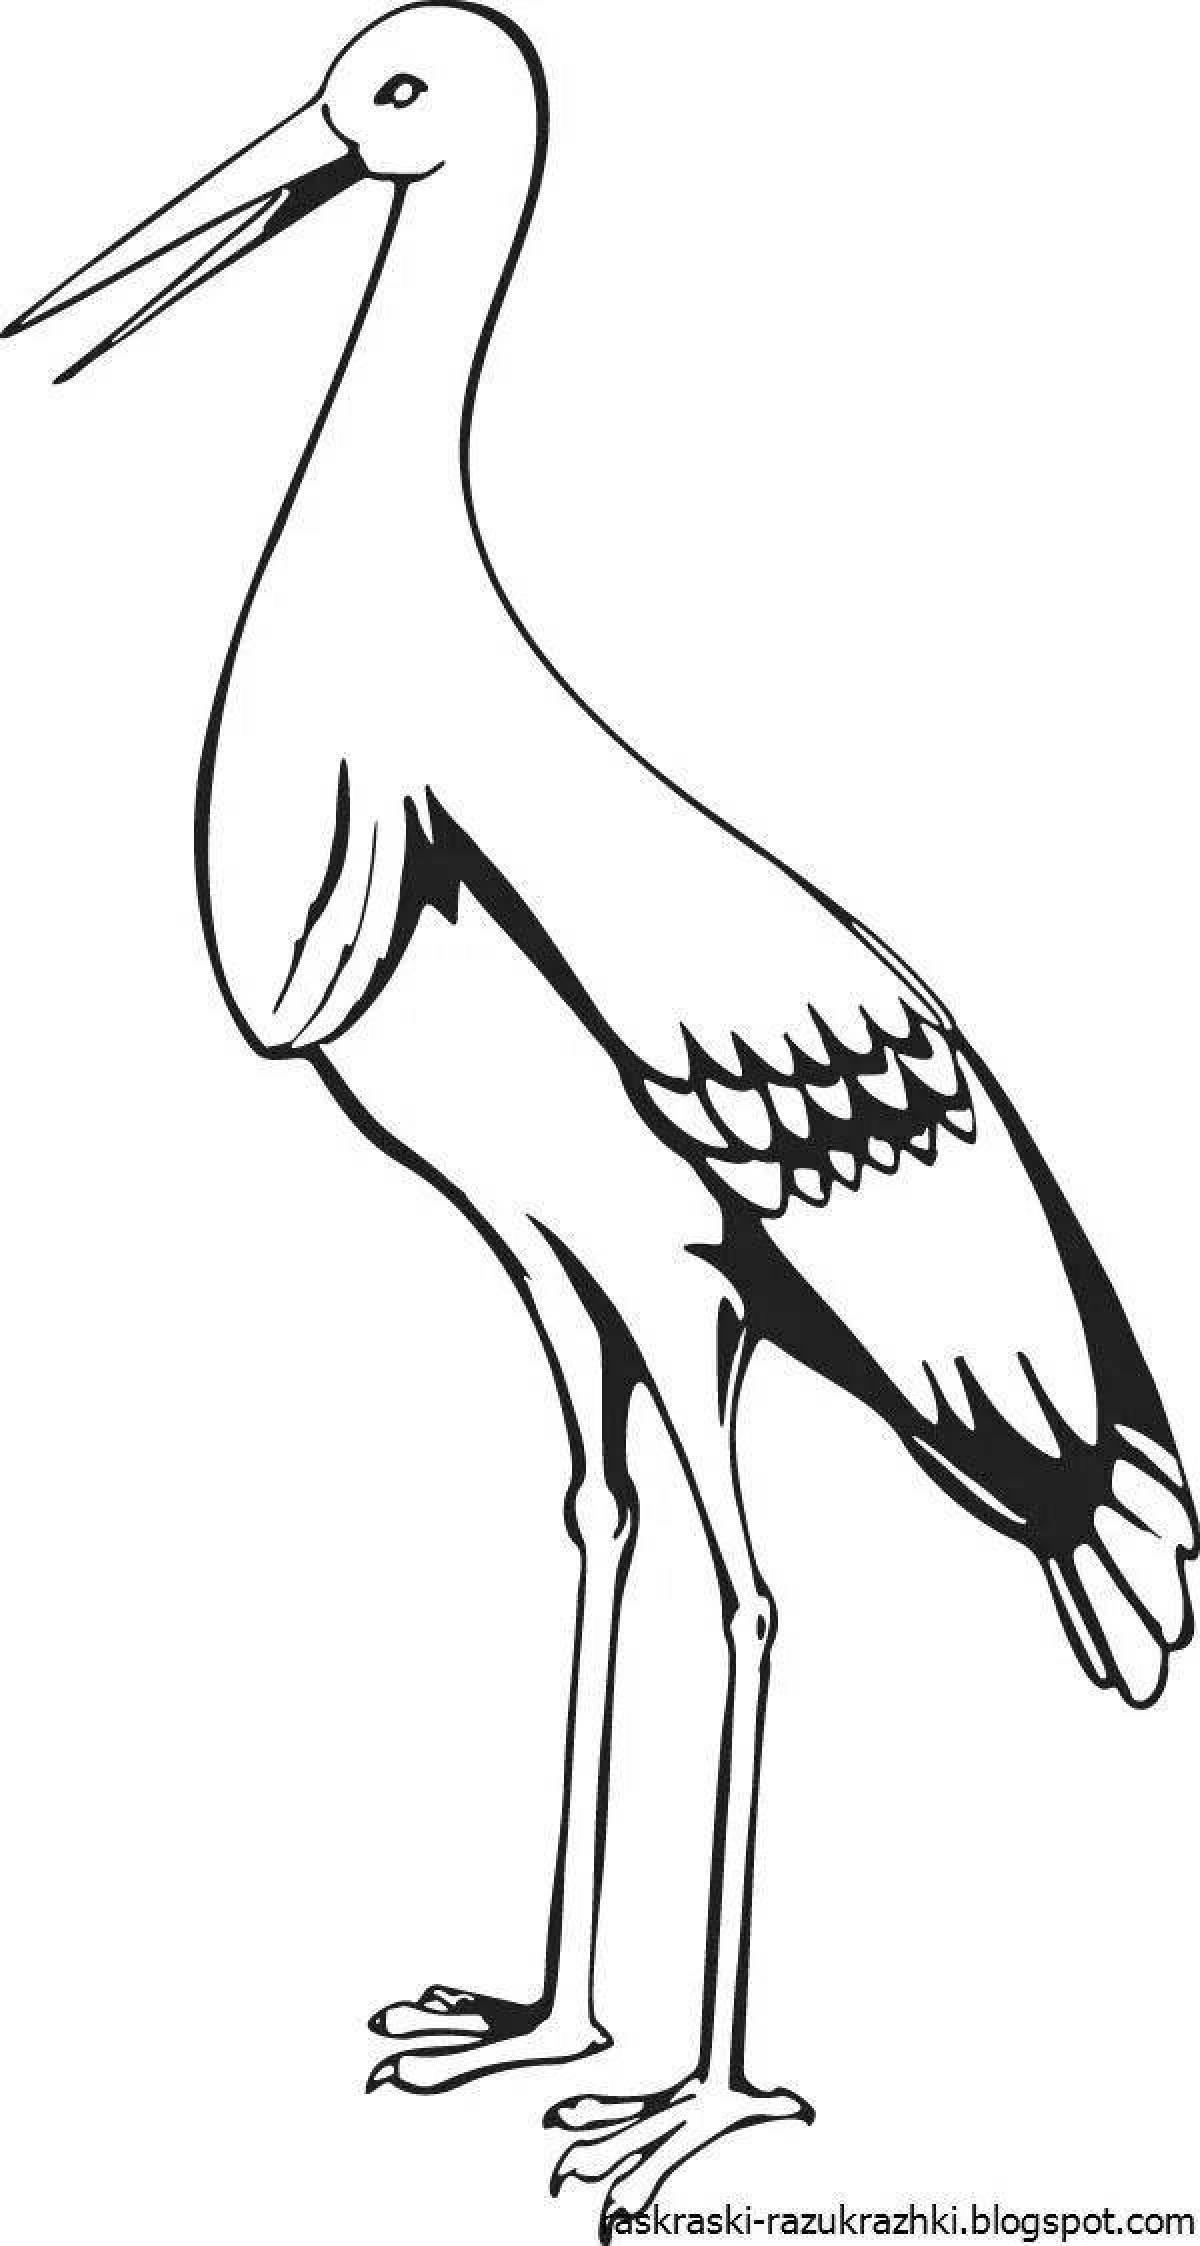 Bright black stork coloring page